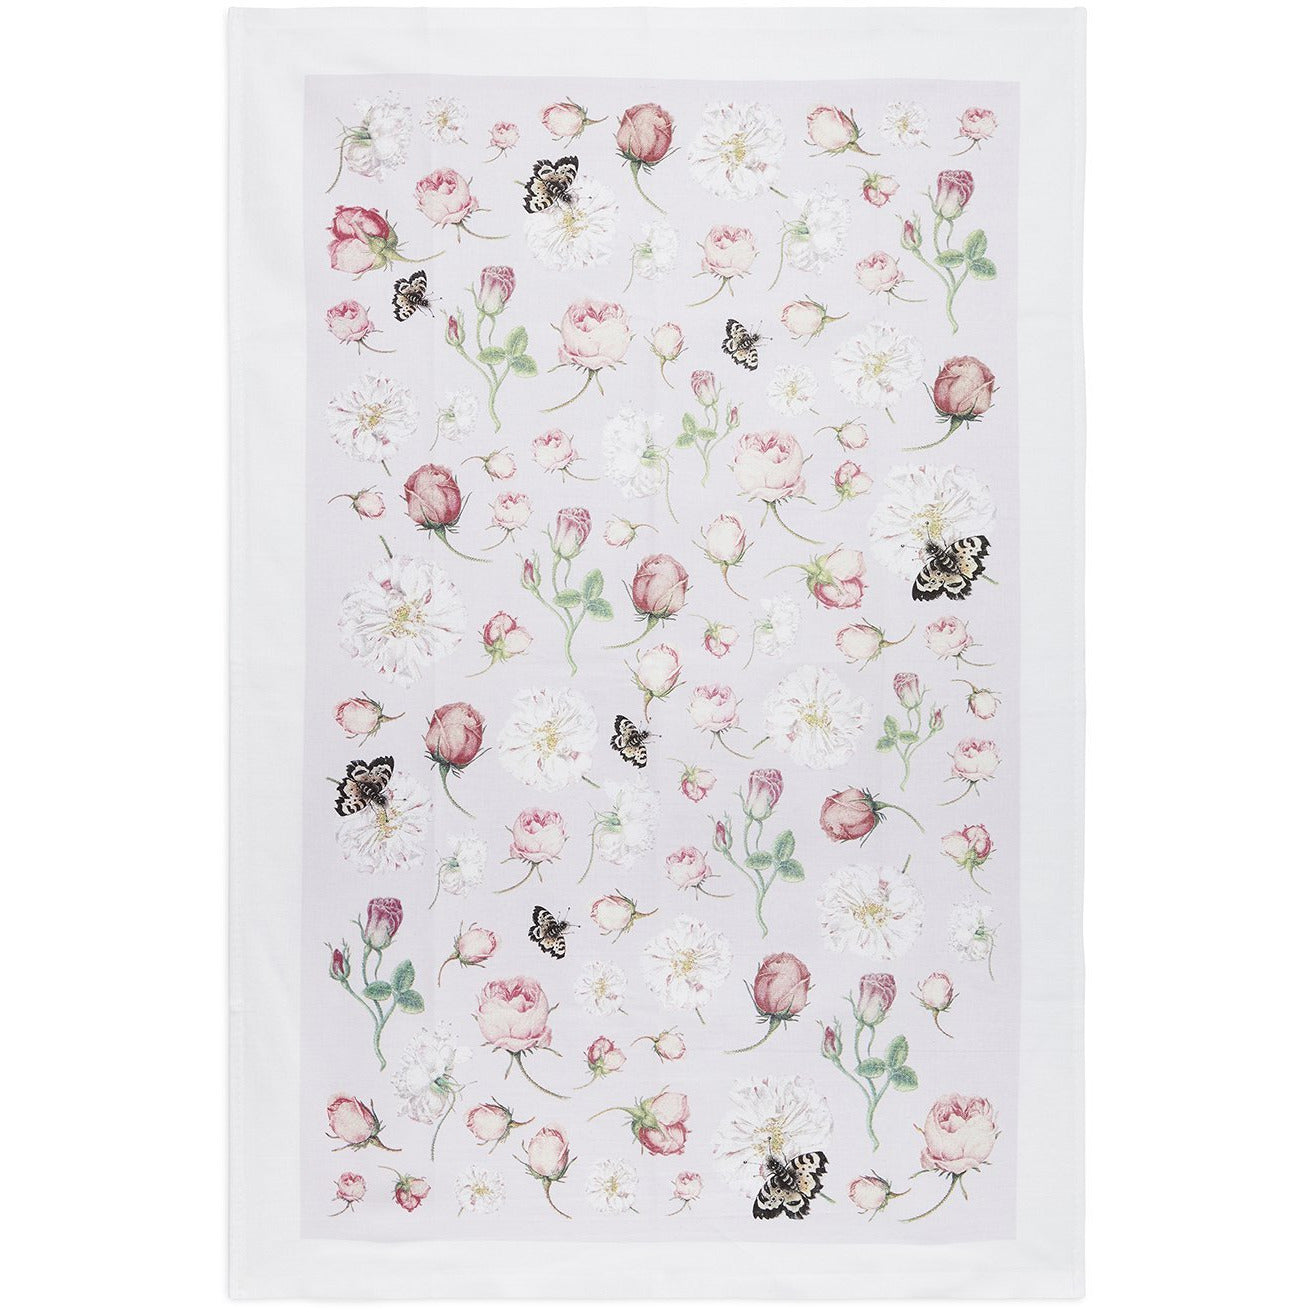 Cotton tea towel, Summer Rose design with illustrations by Nicolas Robert. From the Broughton Collection in the Fitzwilliam Museum, brought to you by CuratingCamrbridge.co.uk